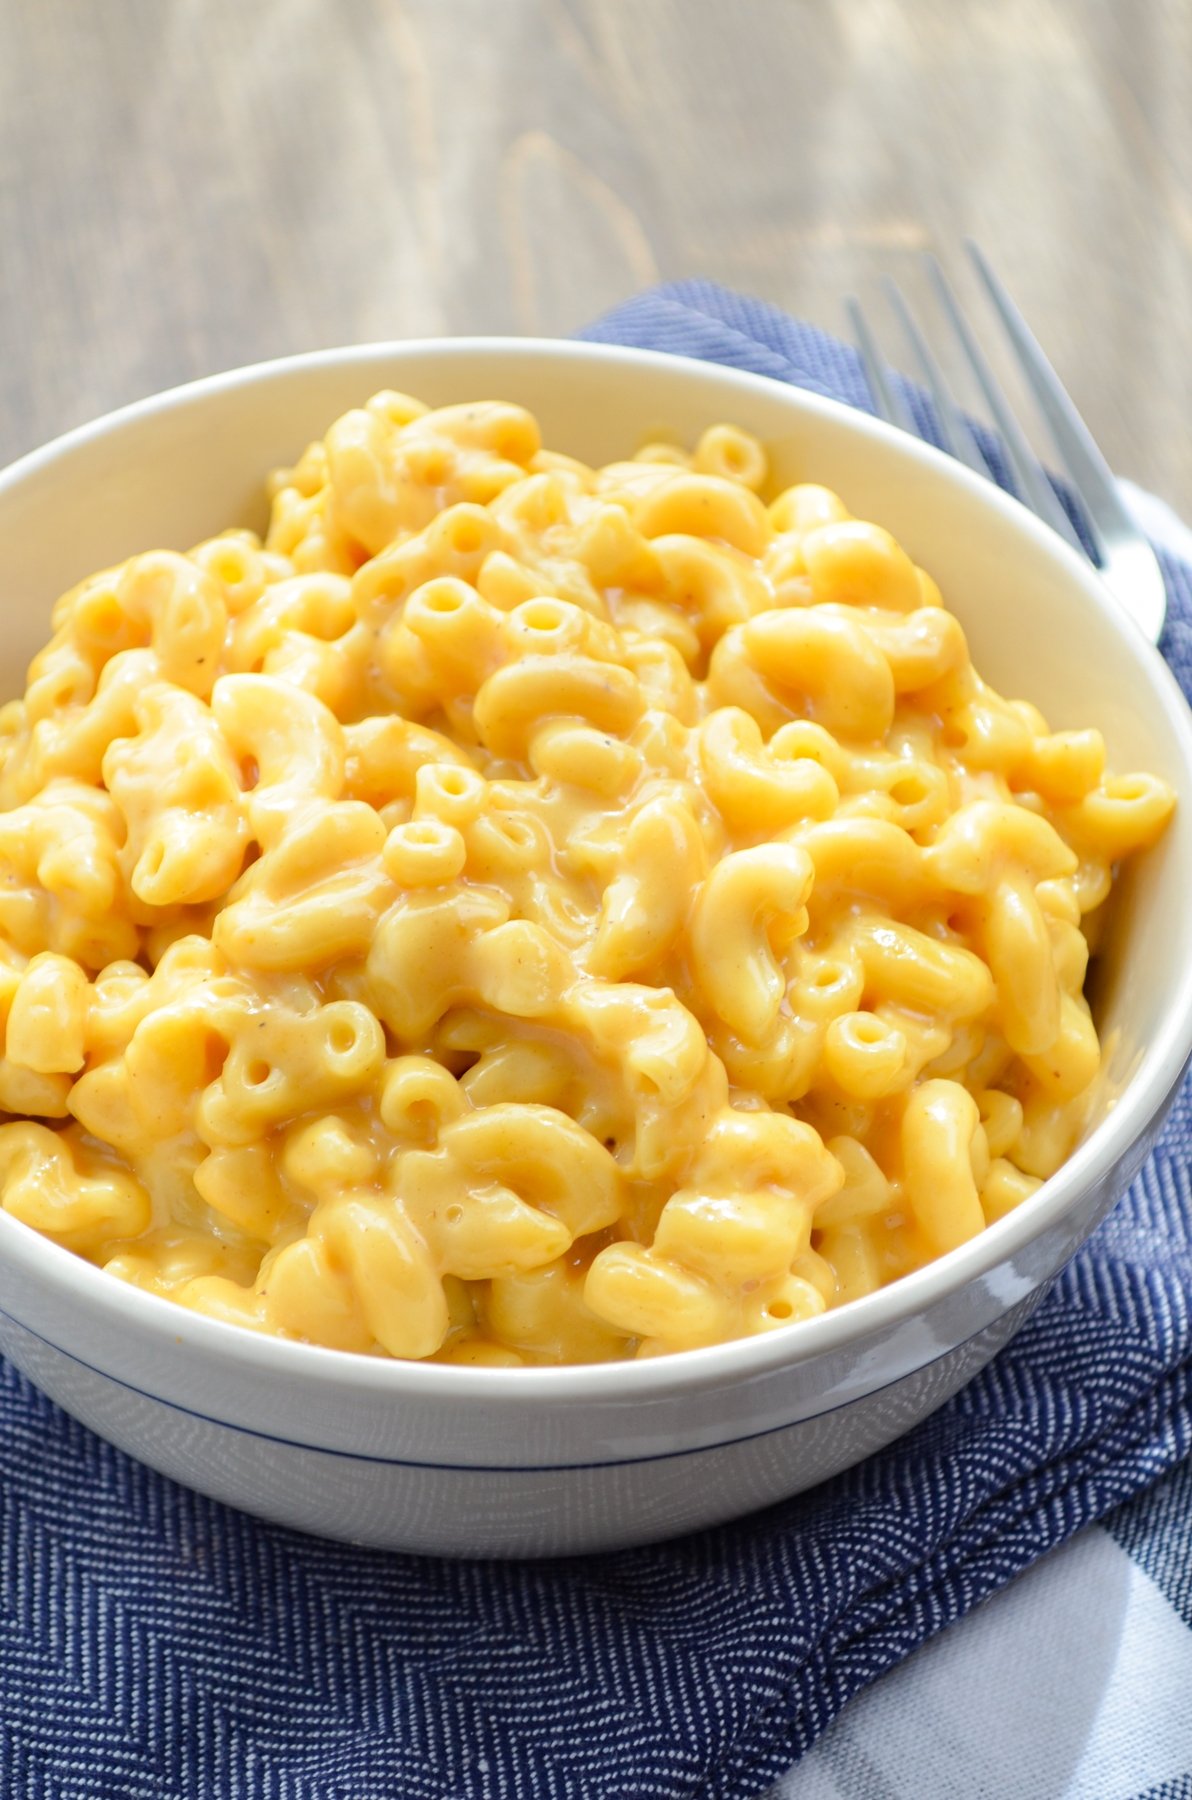 A bowl of macaroni and cheese, resting on blue napkins.